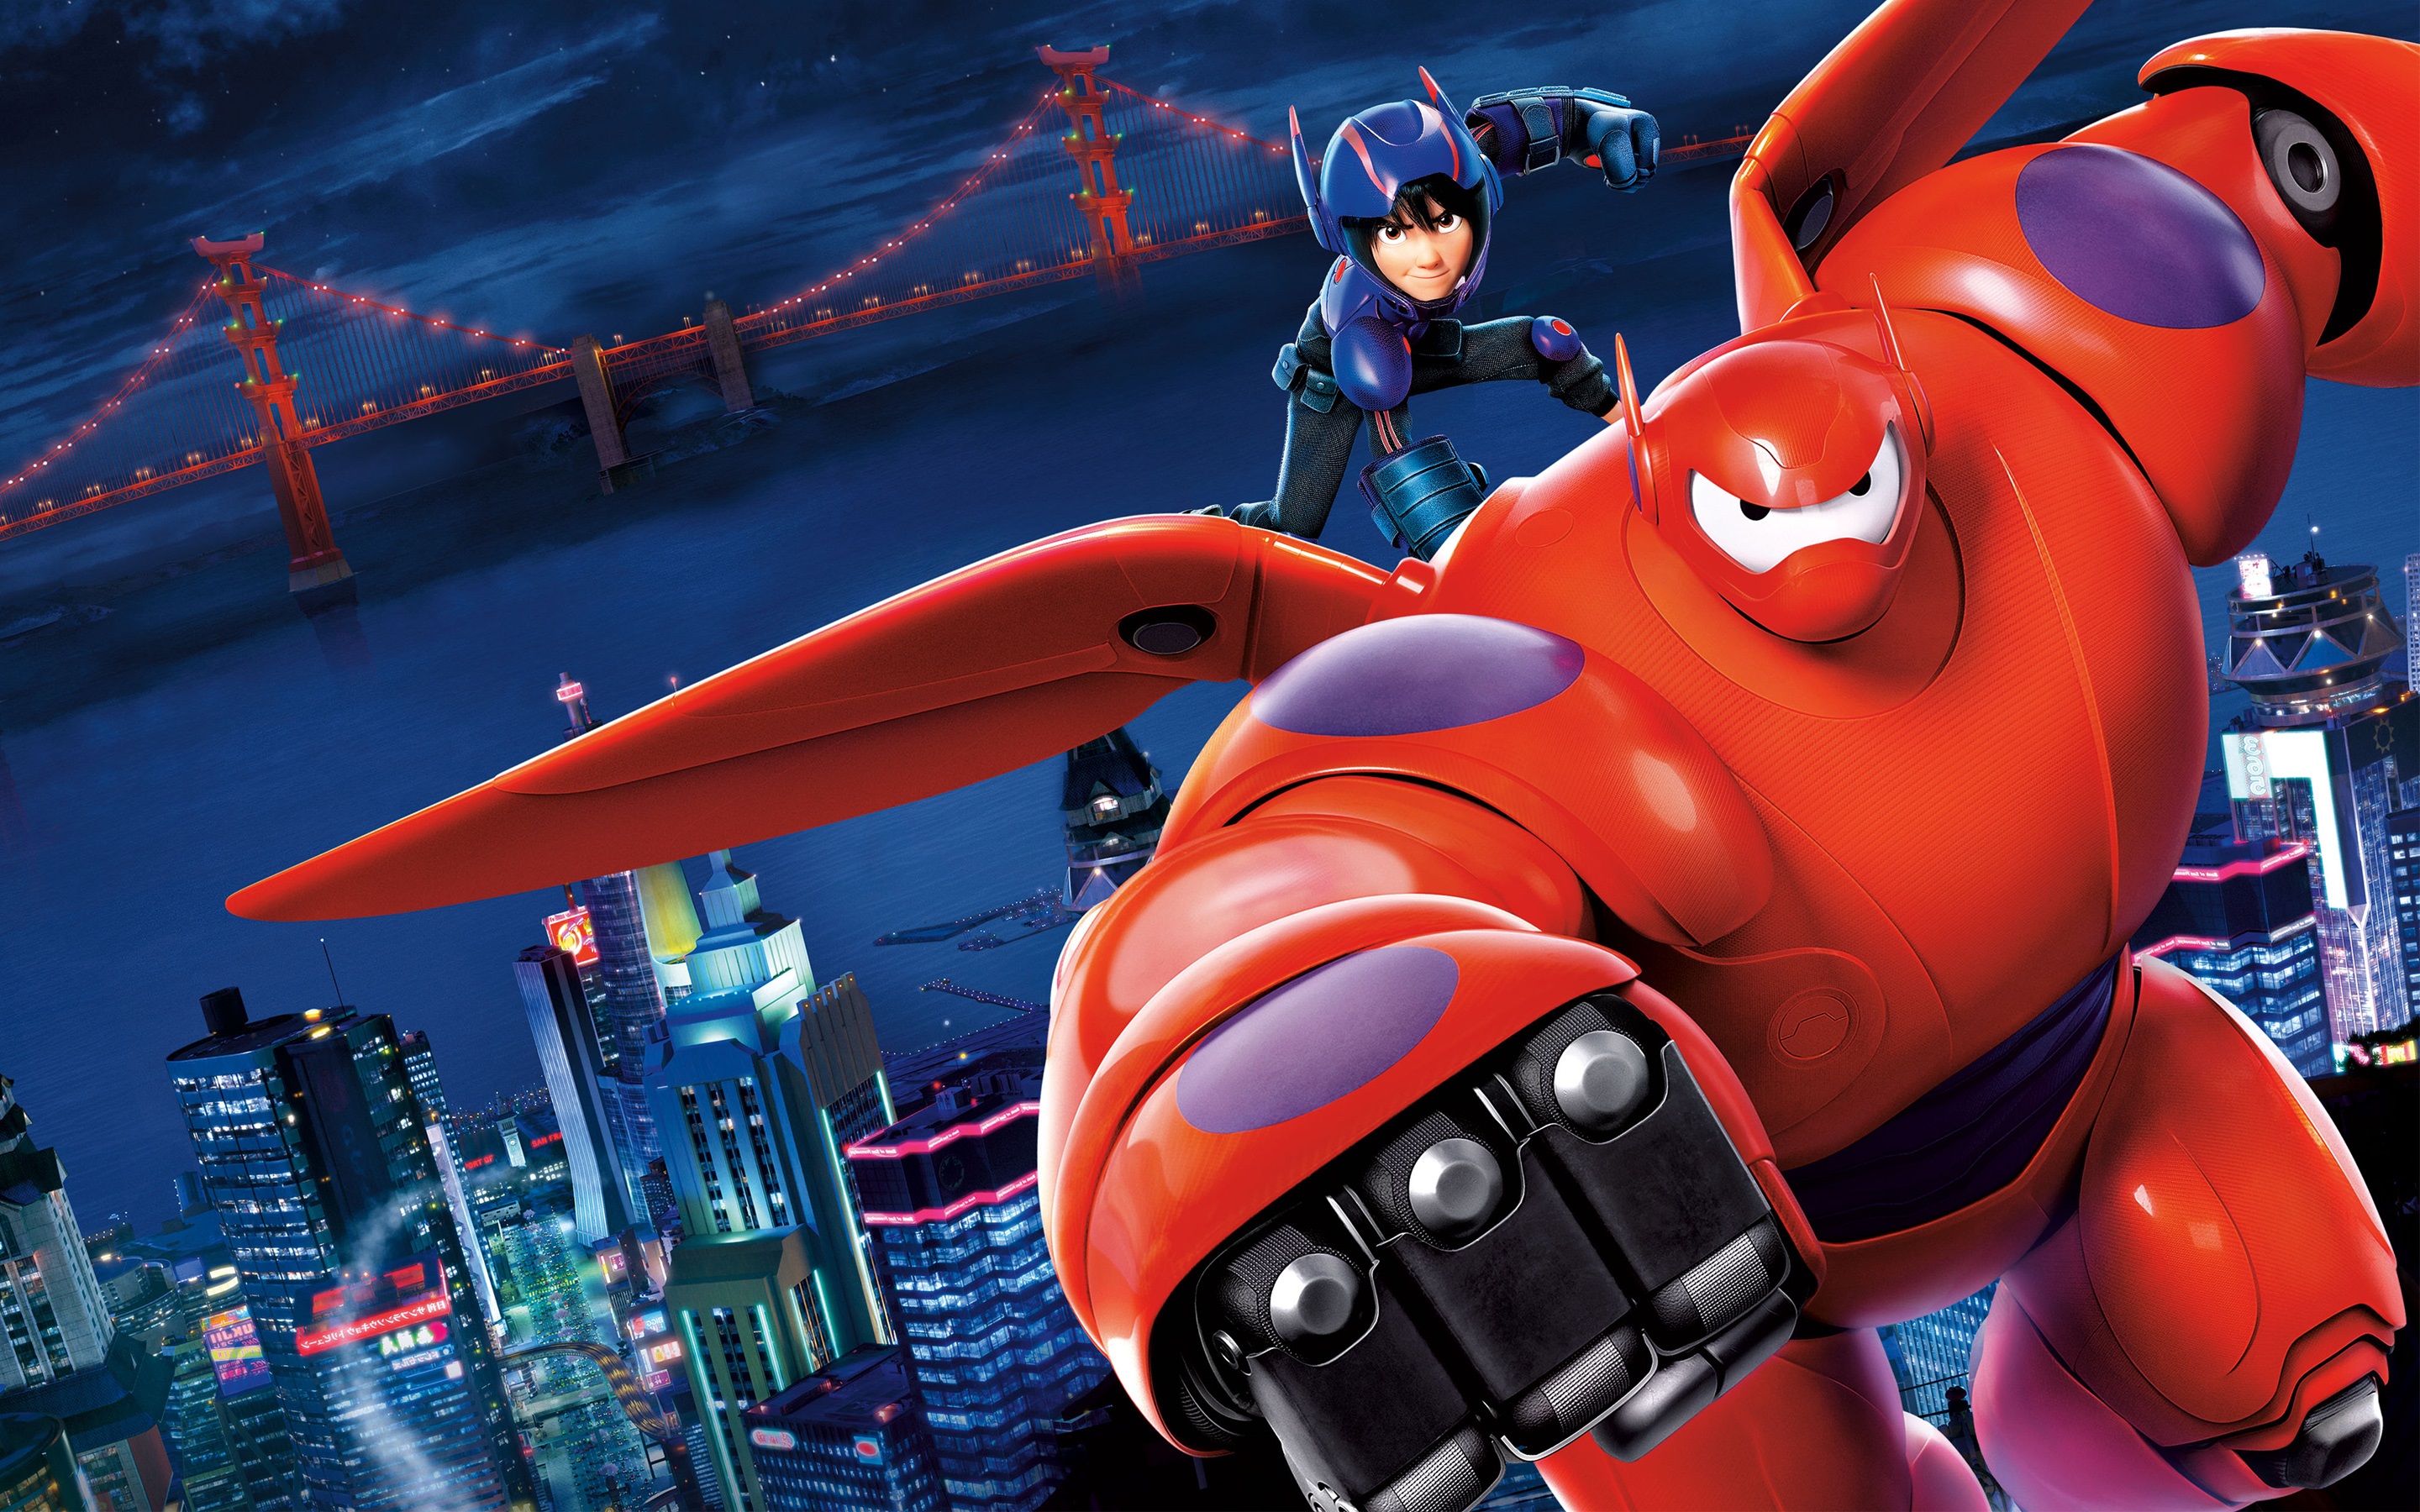 BIG HERO 6 Is Saved By Its Scene-Stealing Robot